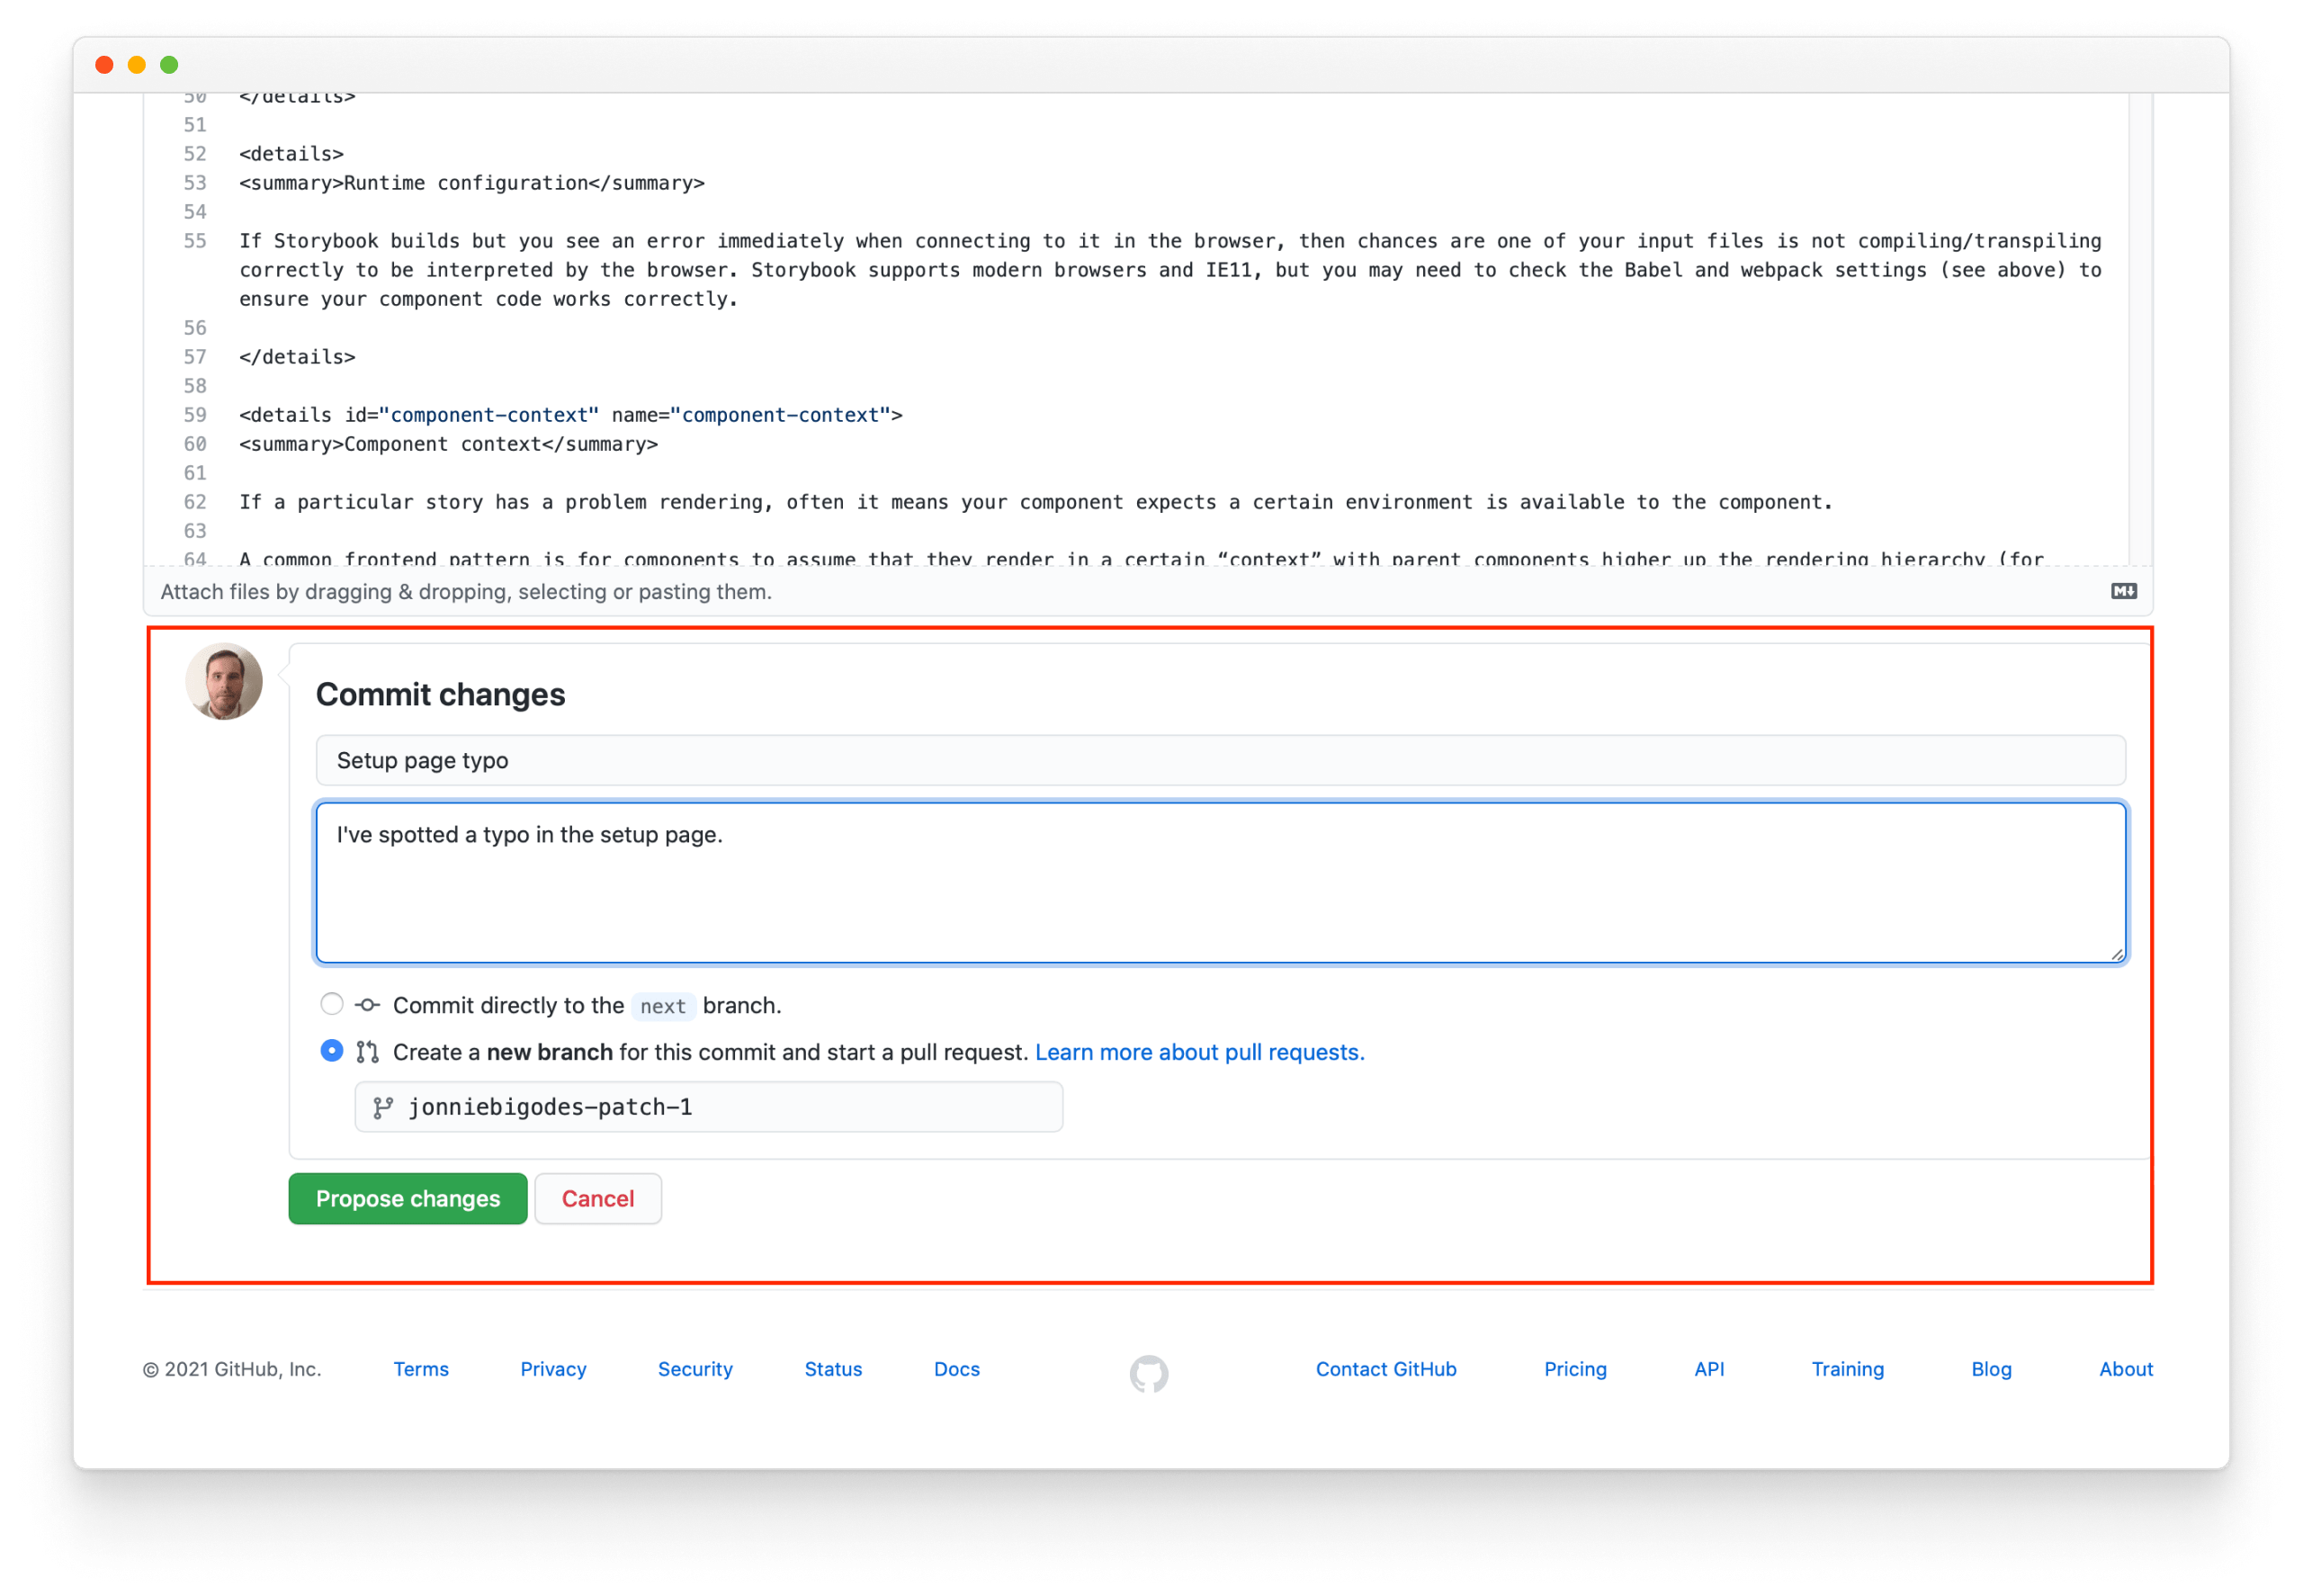 Fill the commit information